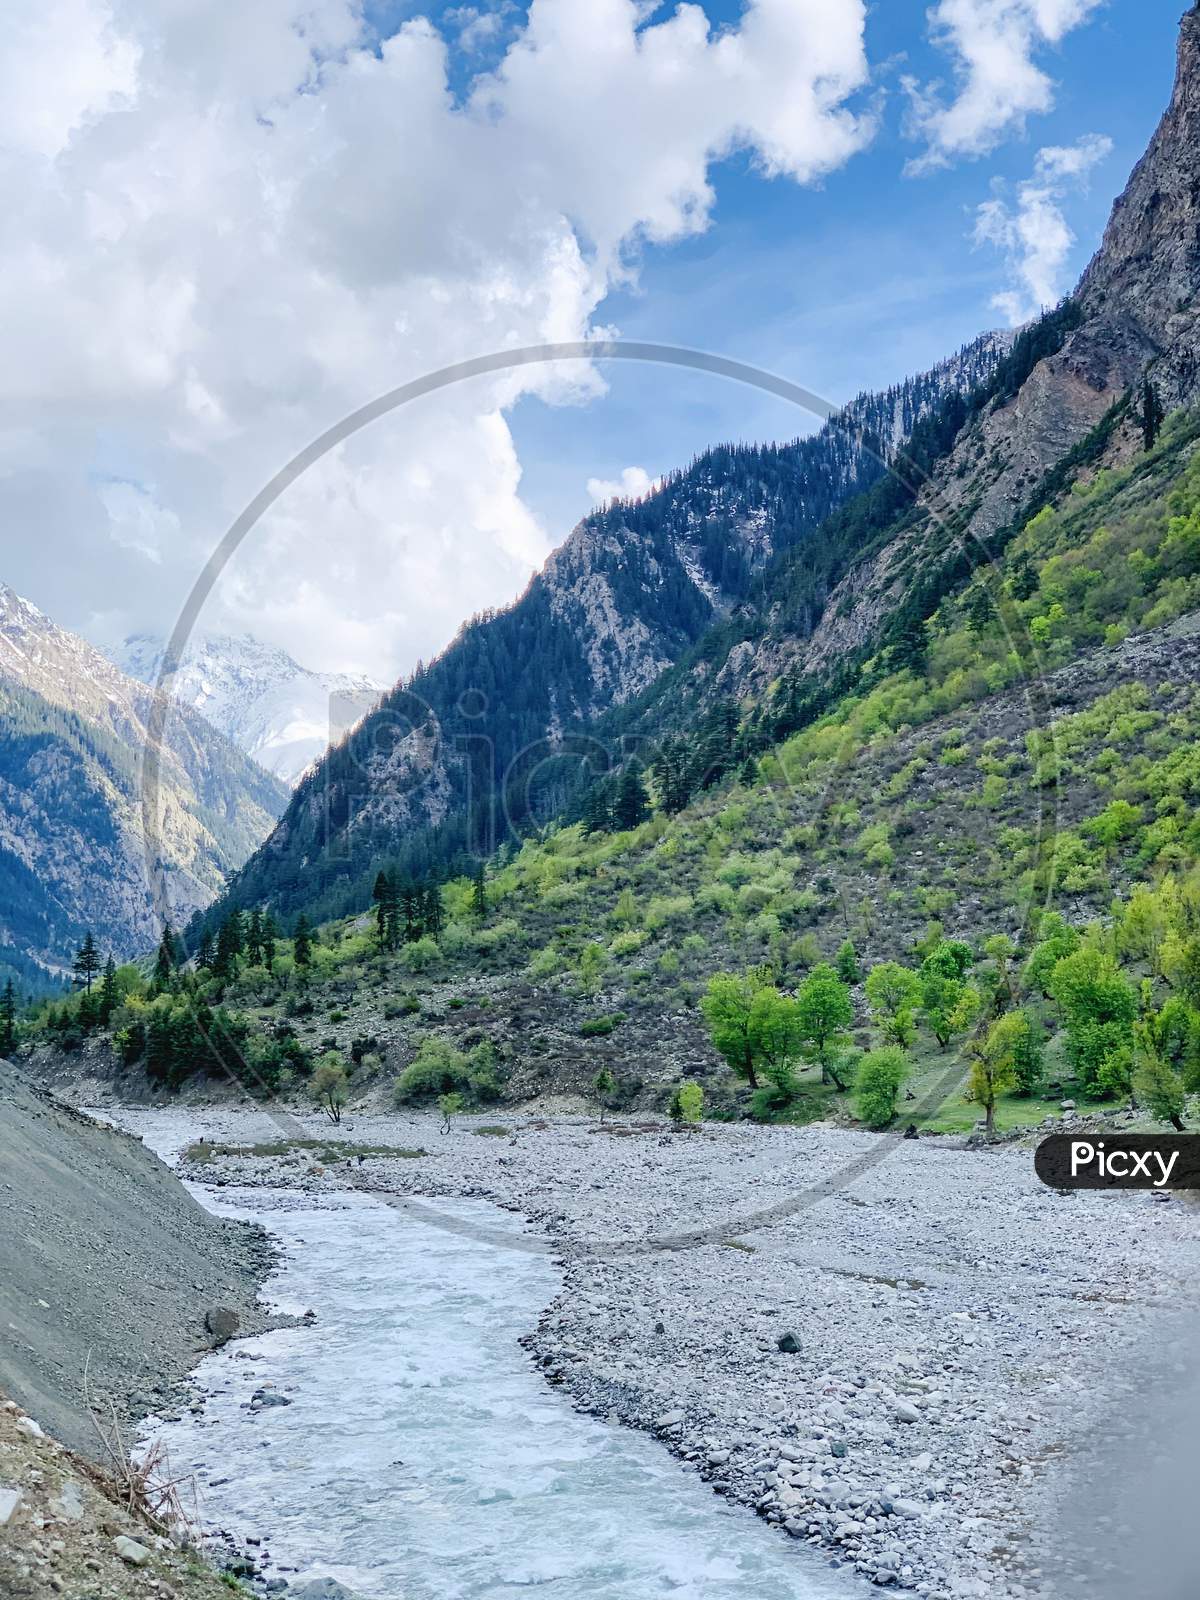 The View On The River At Swat Valley, Pakistan